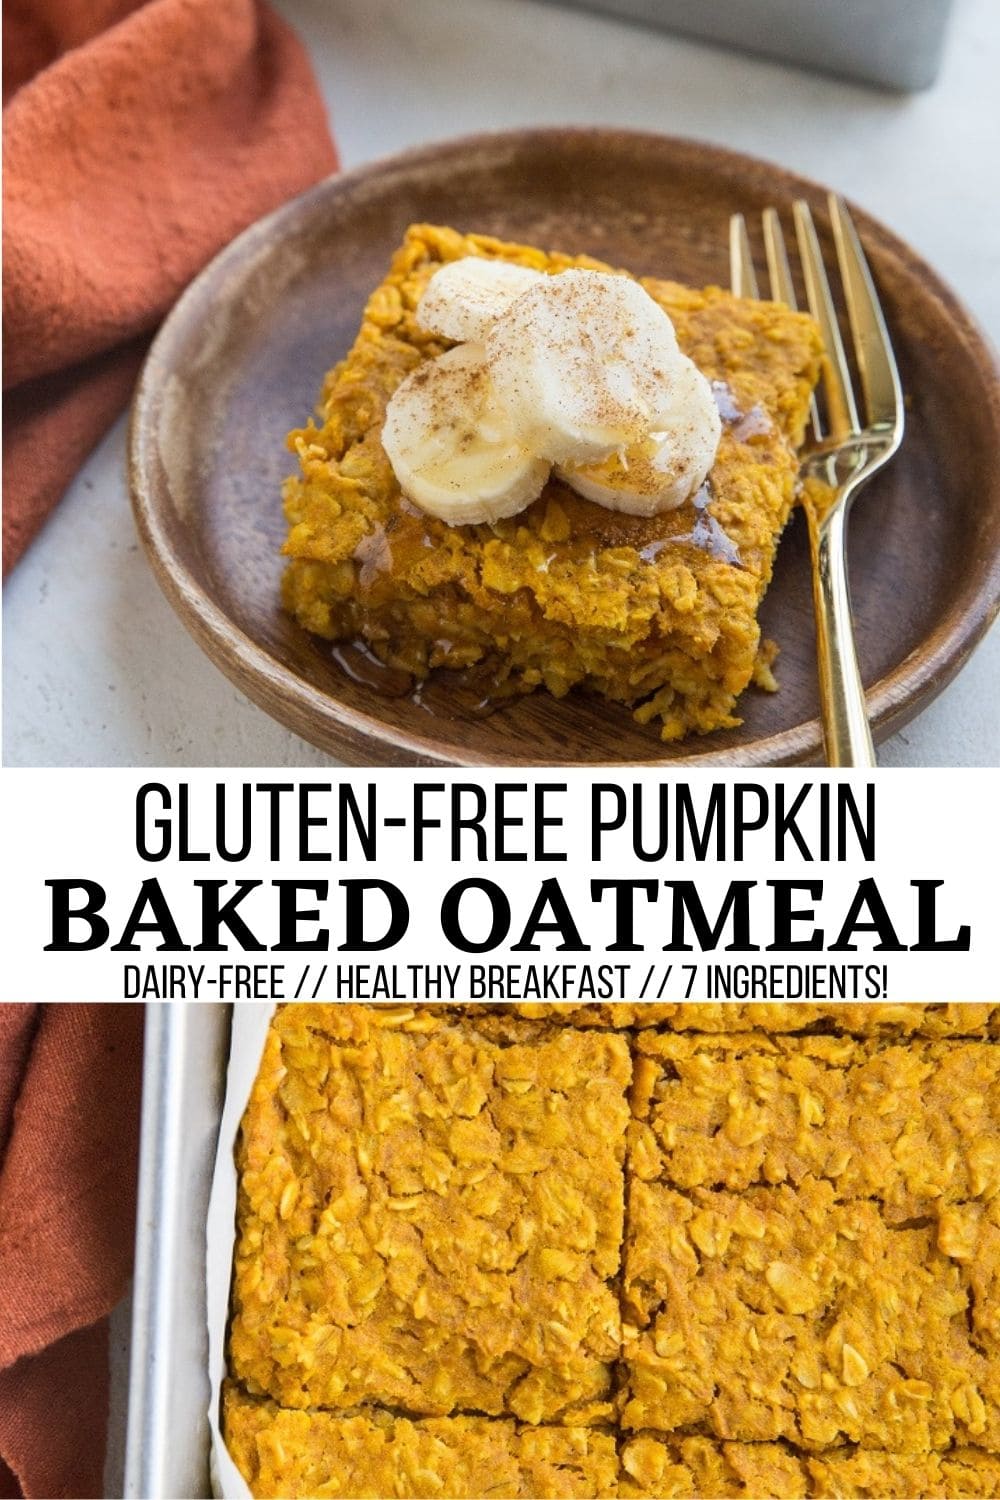 Pumpkin Baked Oatmeal (Gluten-Free, Dairy-Free) - The Roasted Root